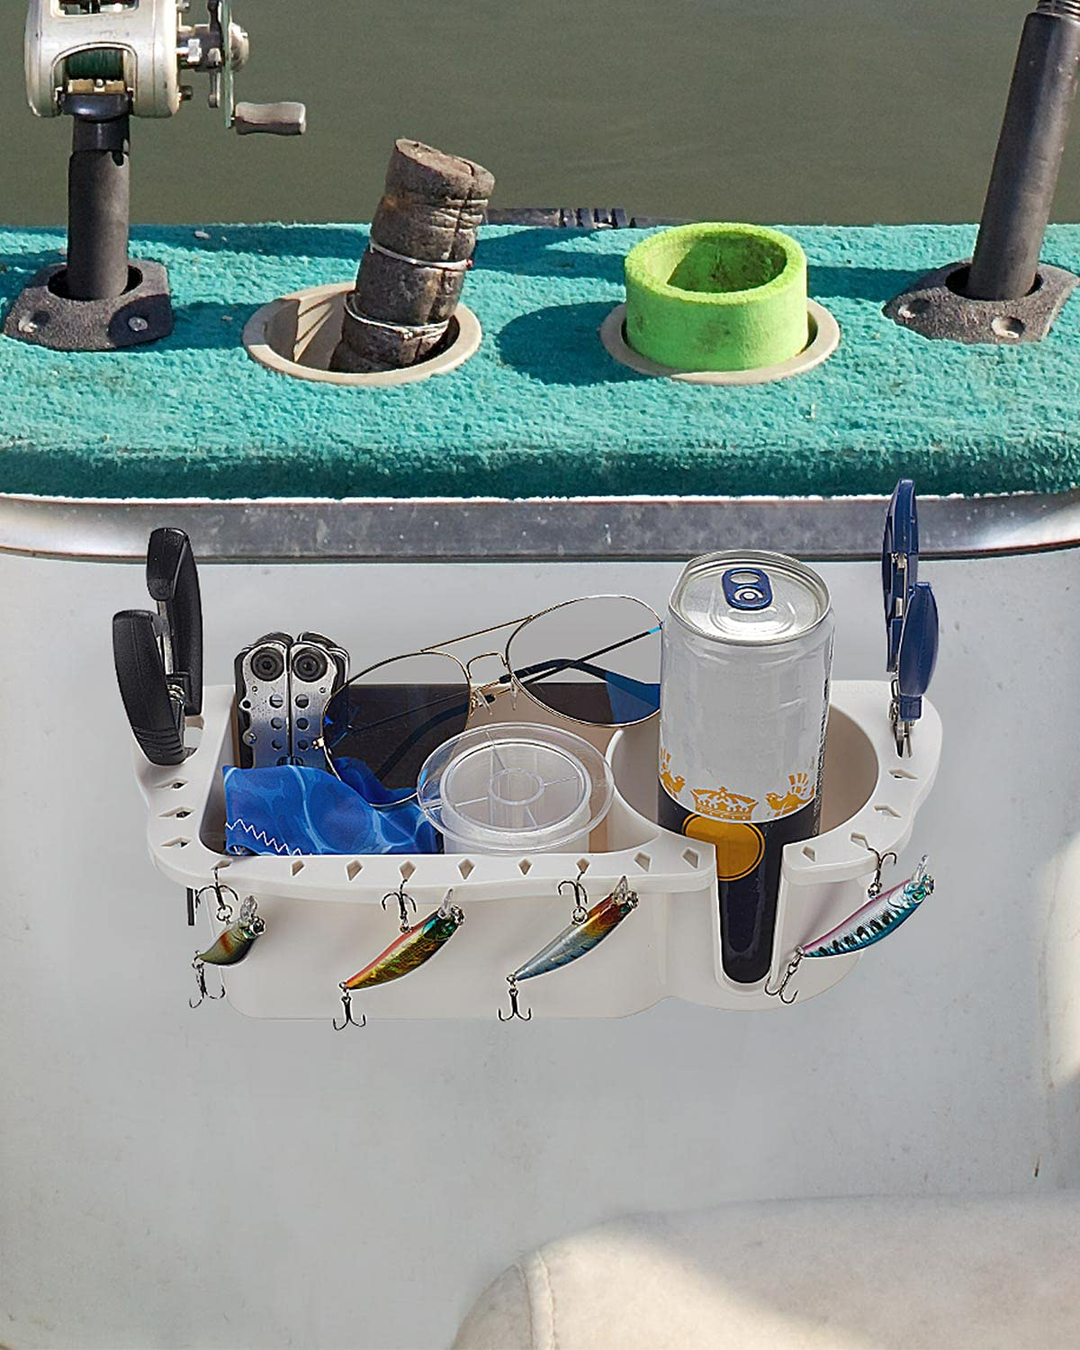 Boat Seat Cup Holder - Upgrade Boat Caddy Organizer